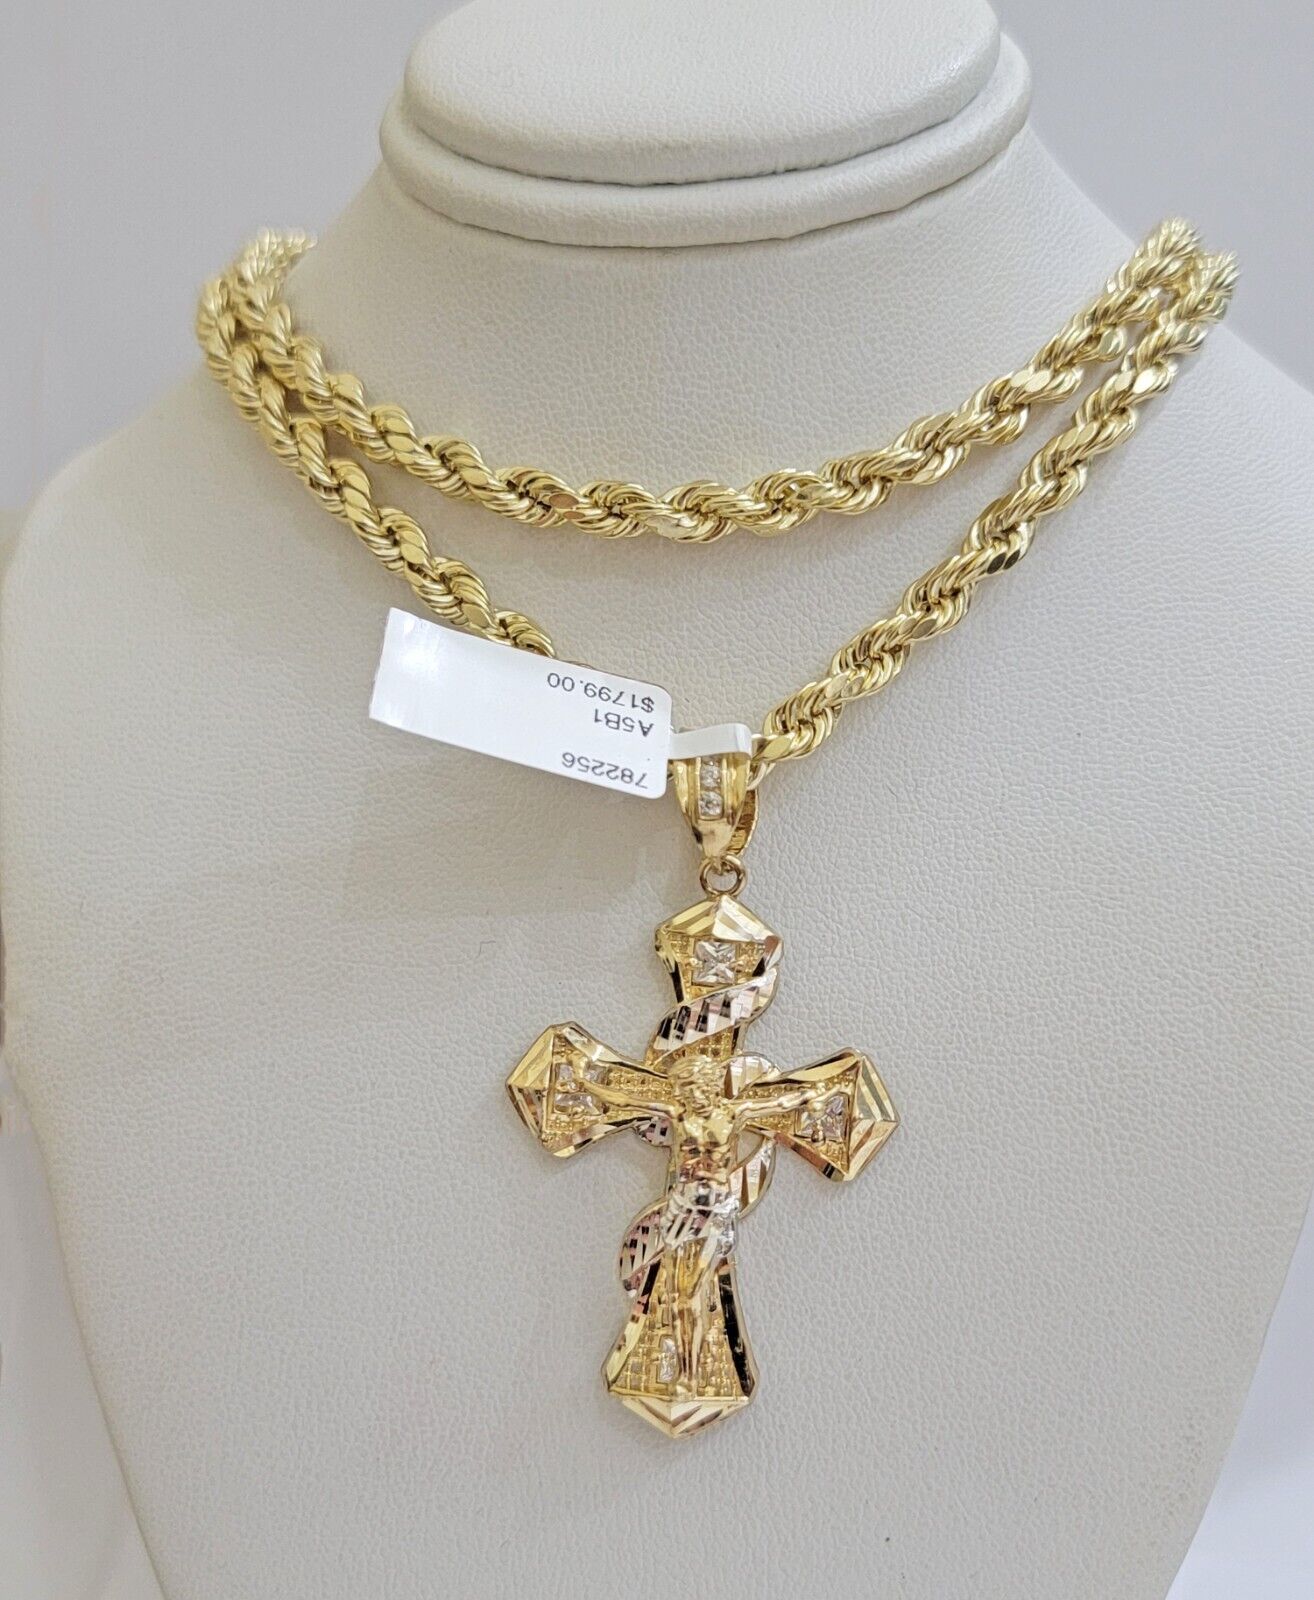 10k Gold Rope Chain Cross Charm Set Necklace 26" inch 5mm Jesus Pendant REAL 10K